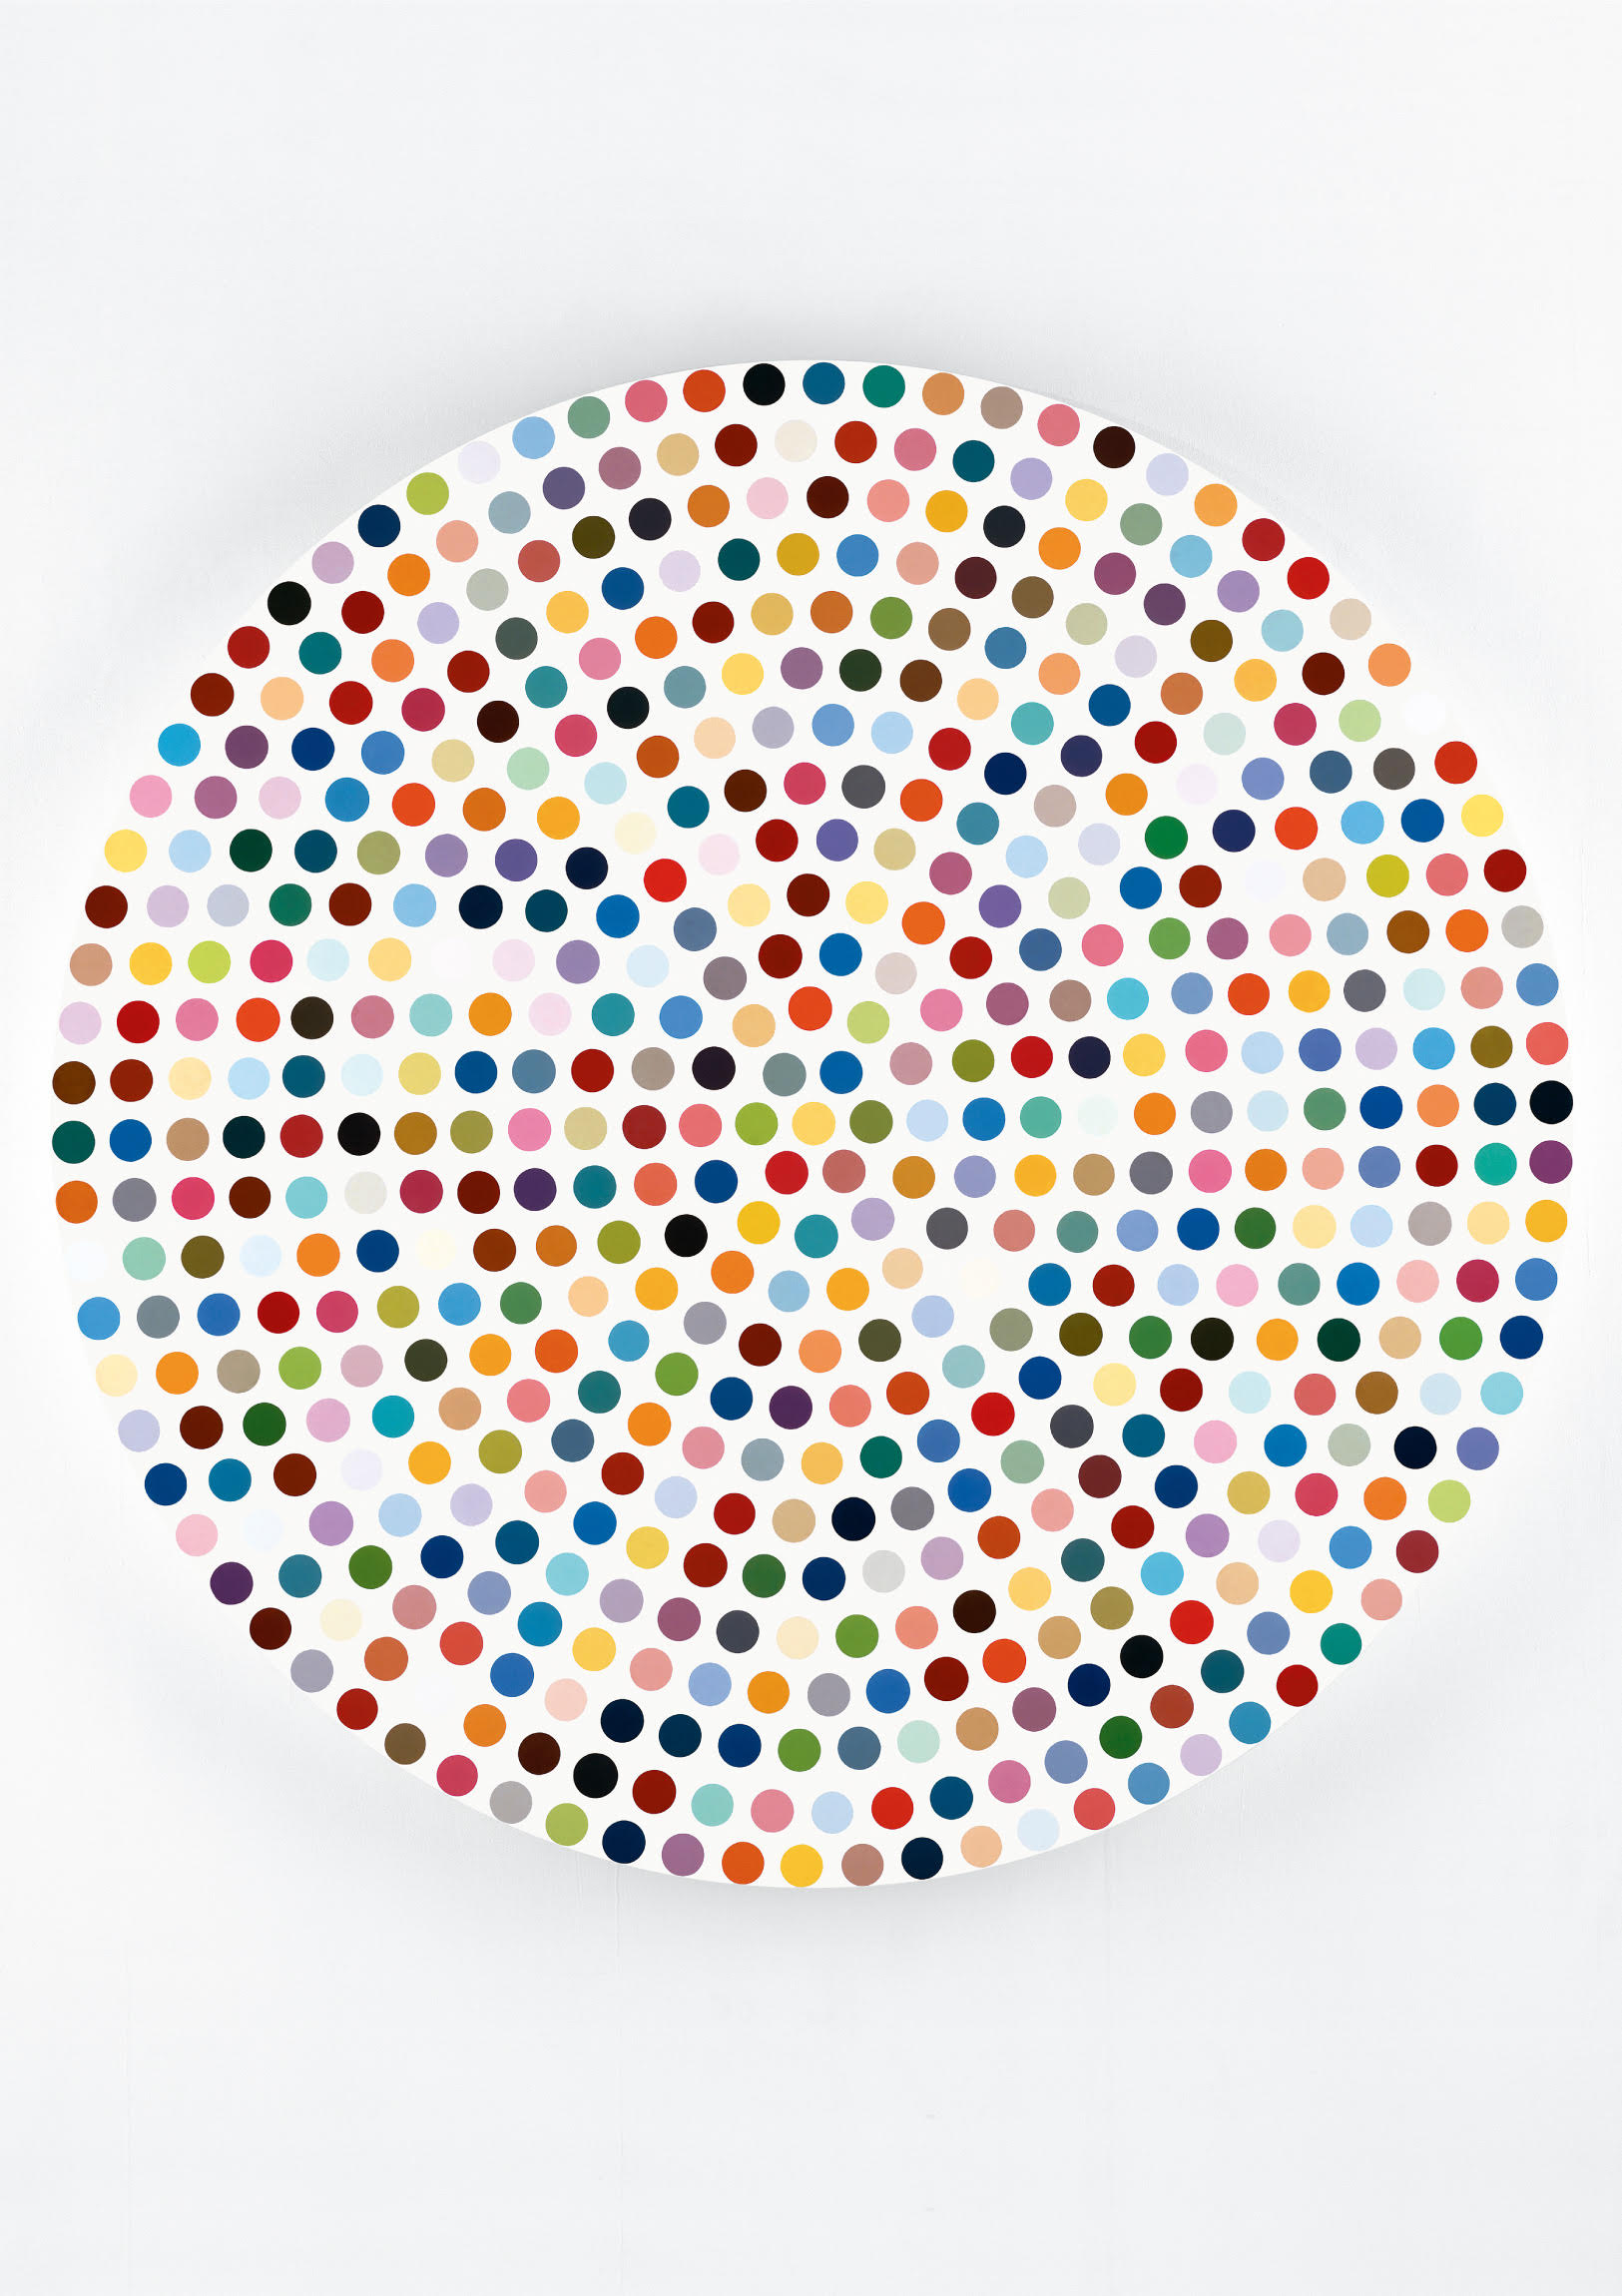 DAMIEN HIRST《ZINC SULFIDE》2004, φ182.9 cm, household gloss on canvas：「HOMMAGE」Sansiao Gallery